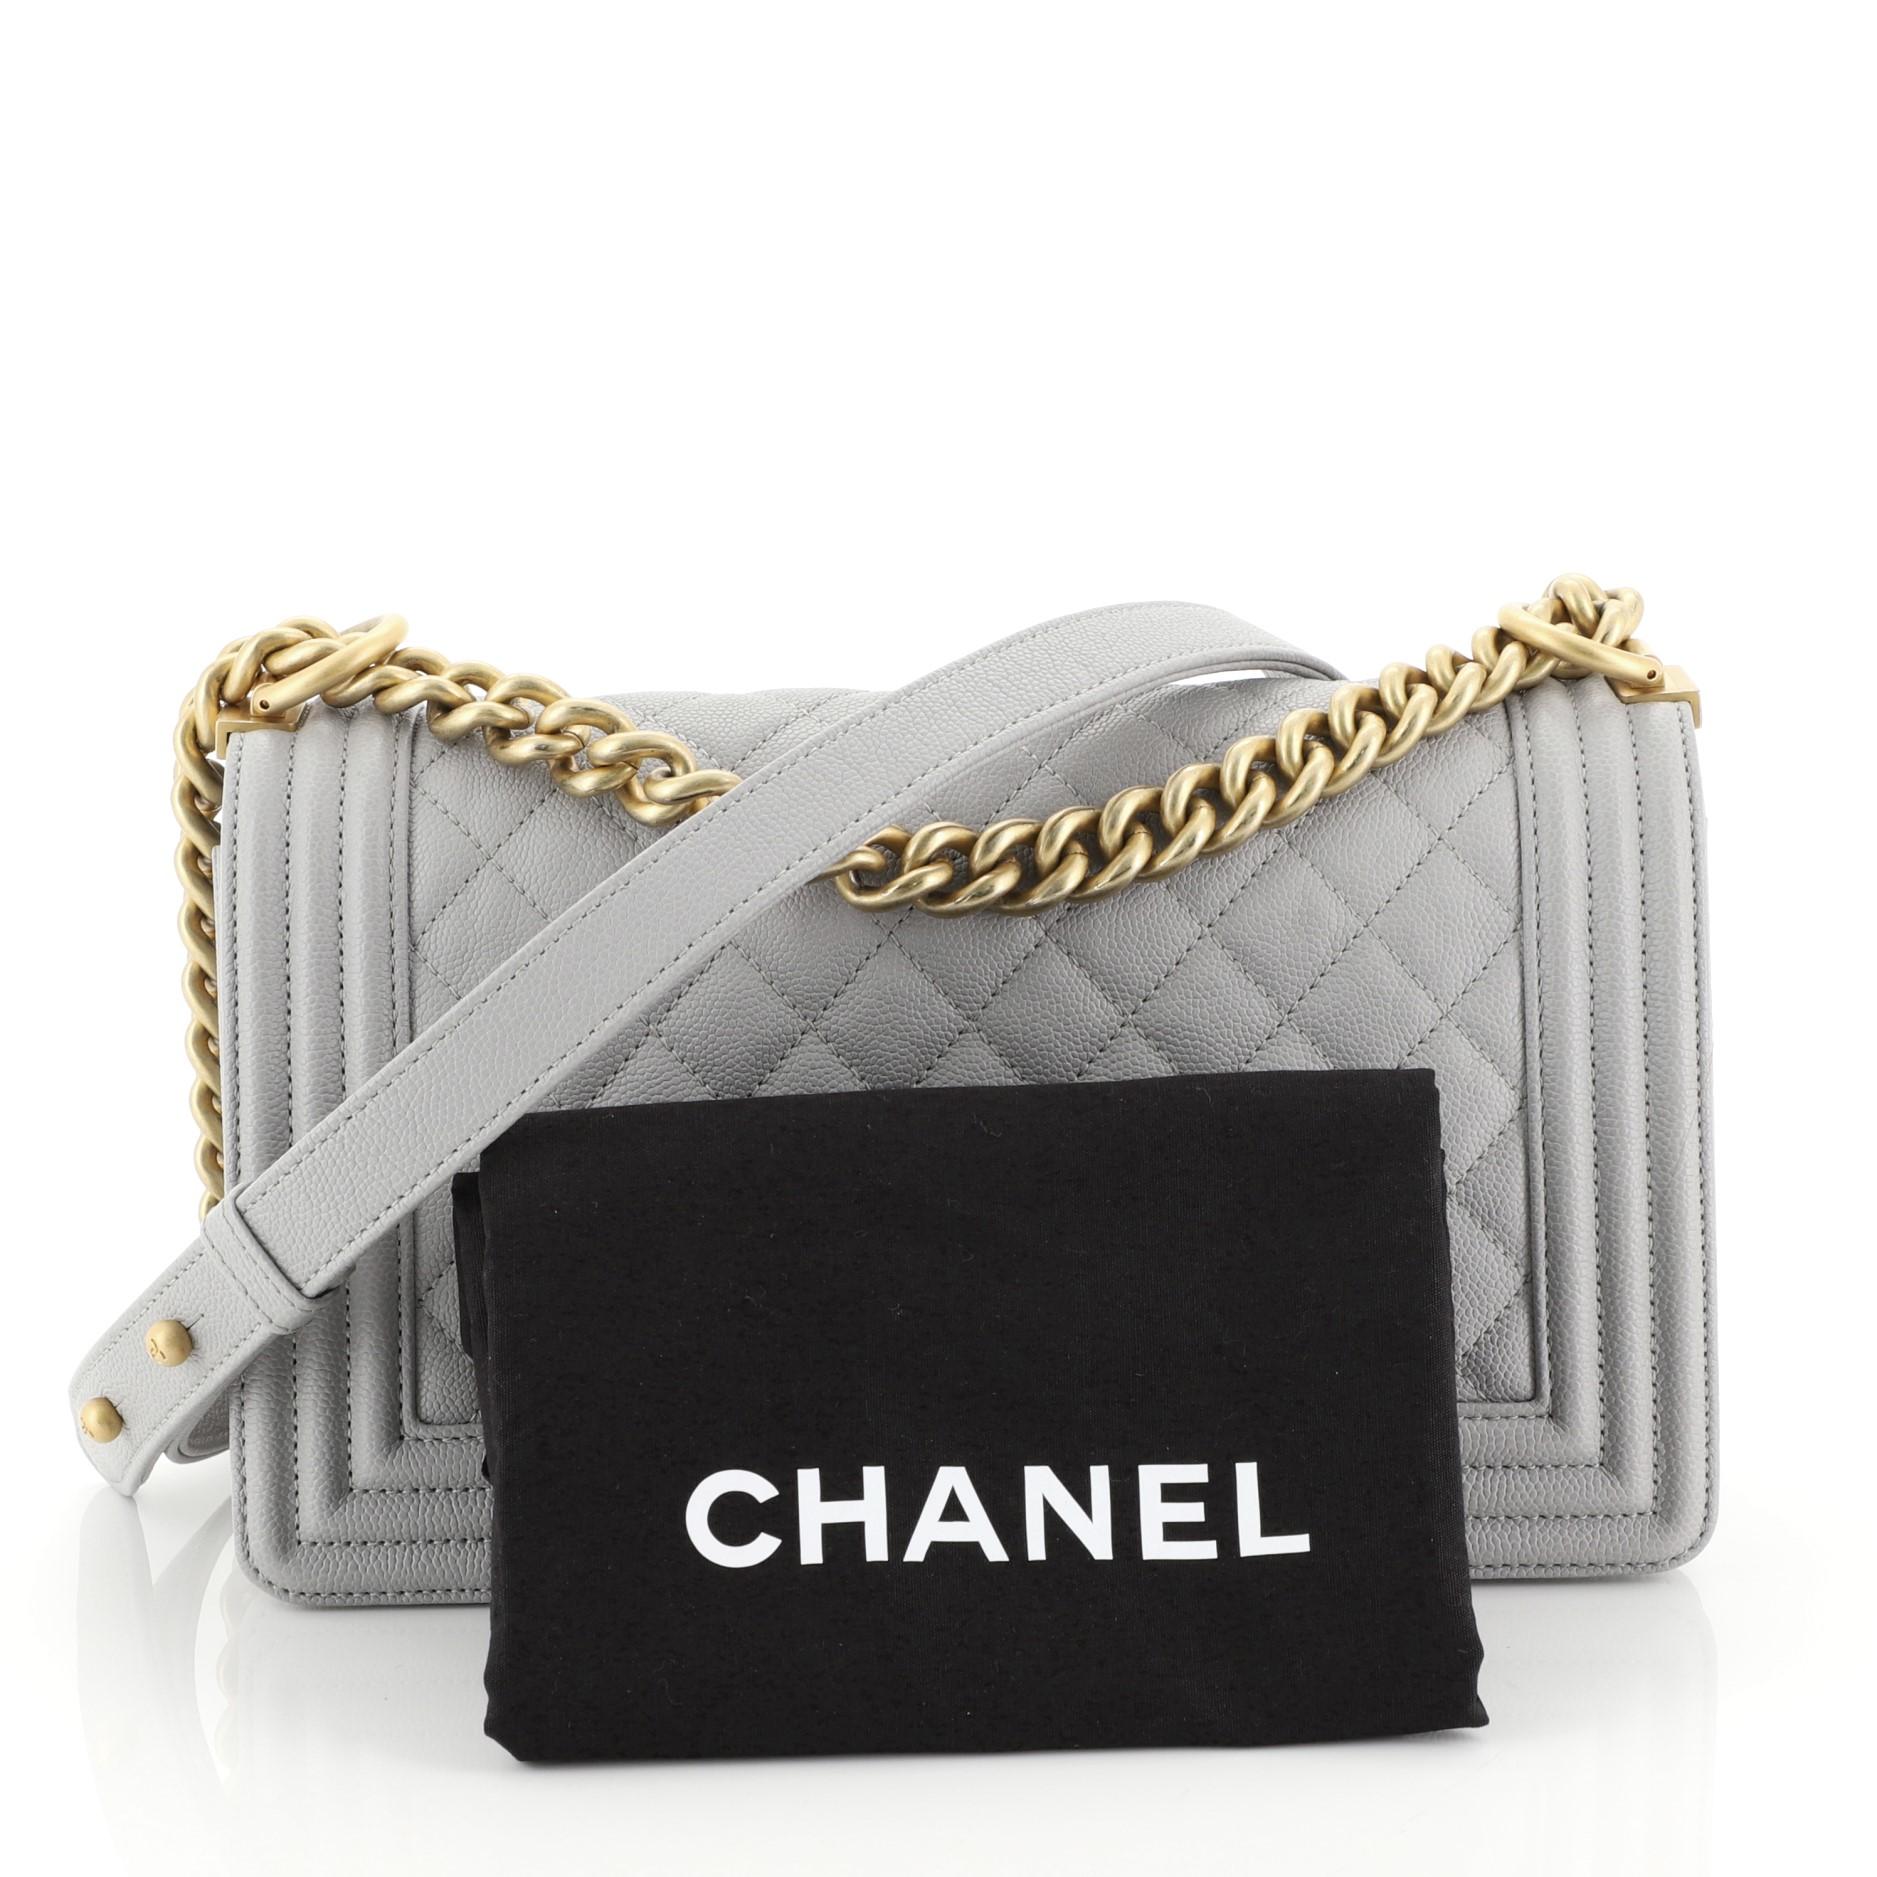 This Chanel Boy Flap Bag Quilted Caviar Old Medium, crafted from gray quilted caviar leather, features chain link strap with leather shoulder pad and gold-tone hardware. Its CC boy logo push-lock closure opens to a gray fabric interior with slip